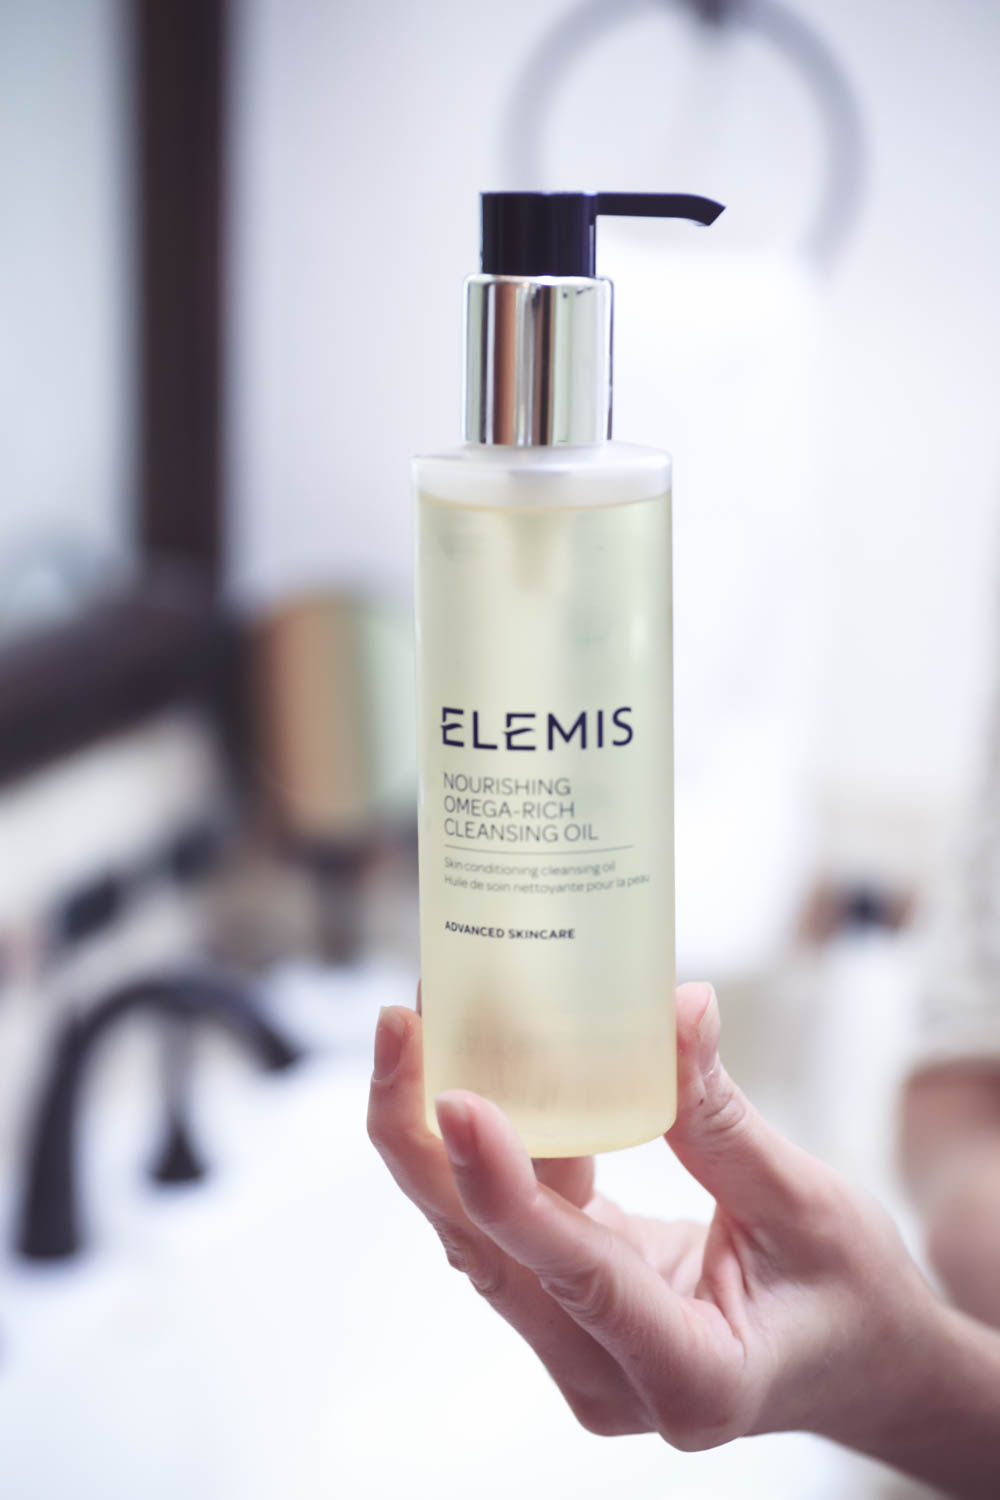 Elemis 3-Piece Set from QVC includes day and night creams and an oil cleanser